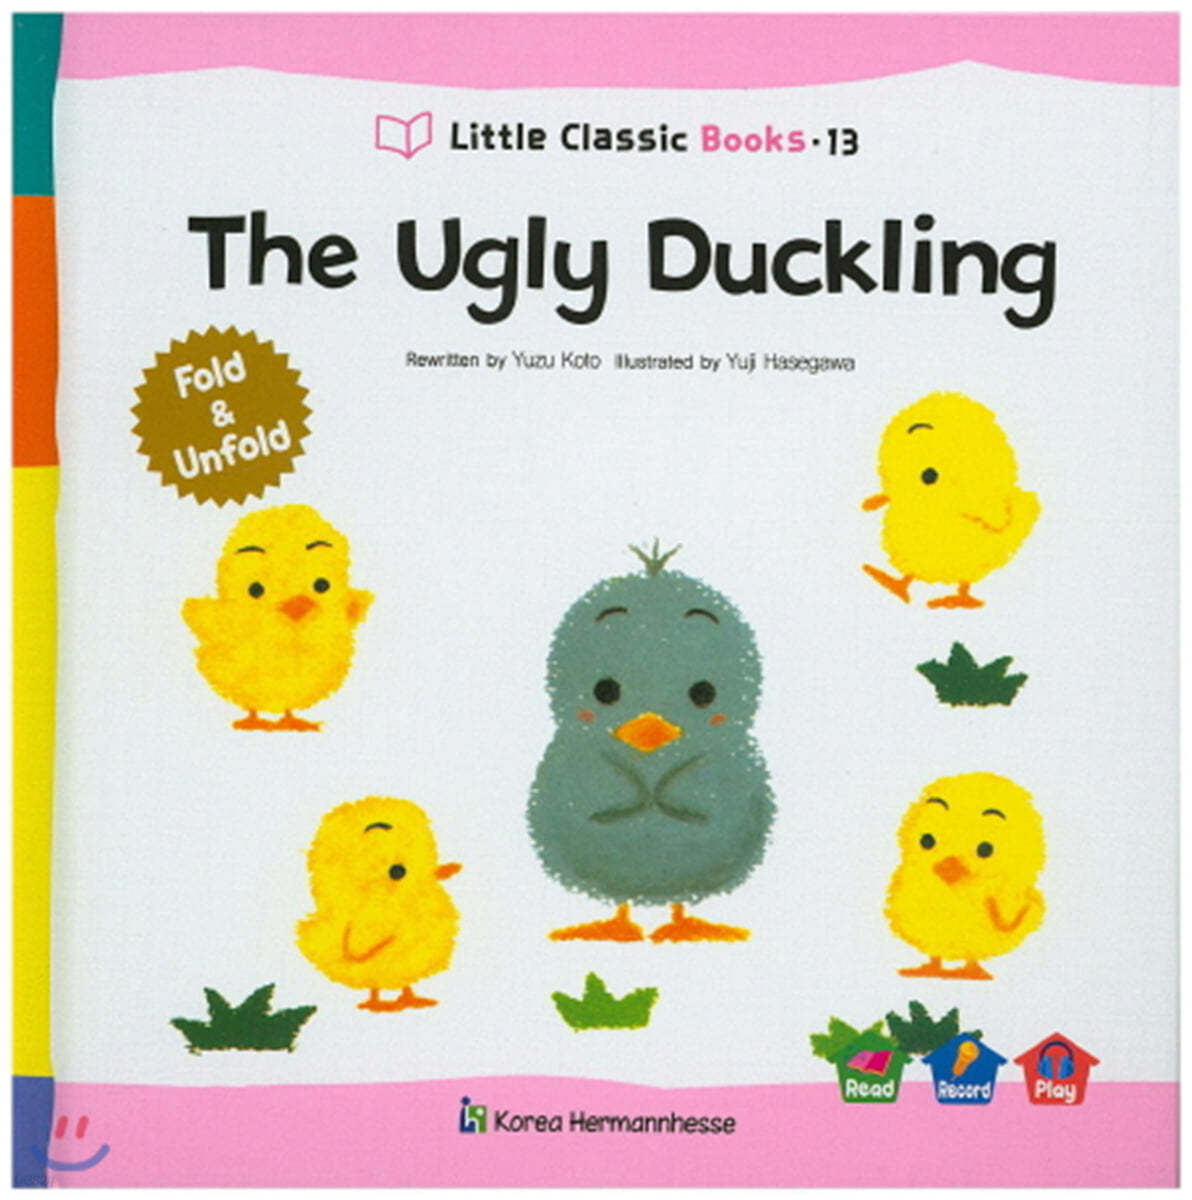 Little Classic Books 13 The Ugly Duckling (양장) 리틀 클래식 북스 (영문판)